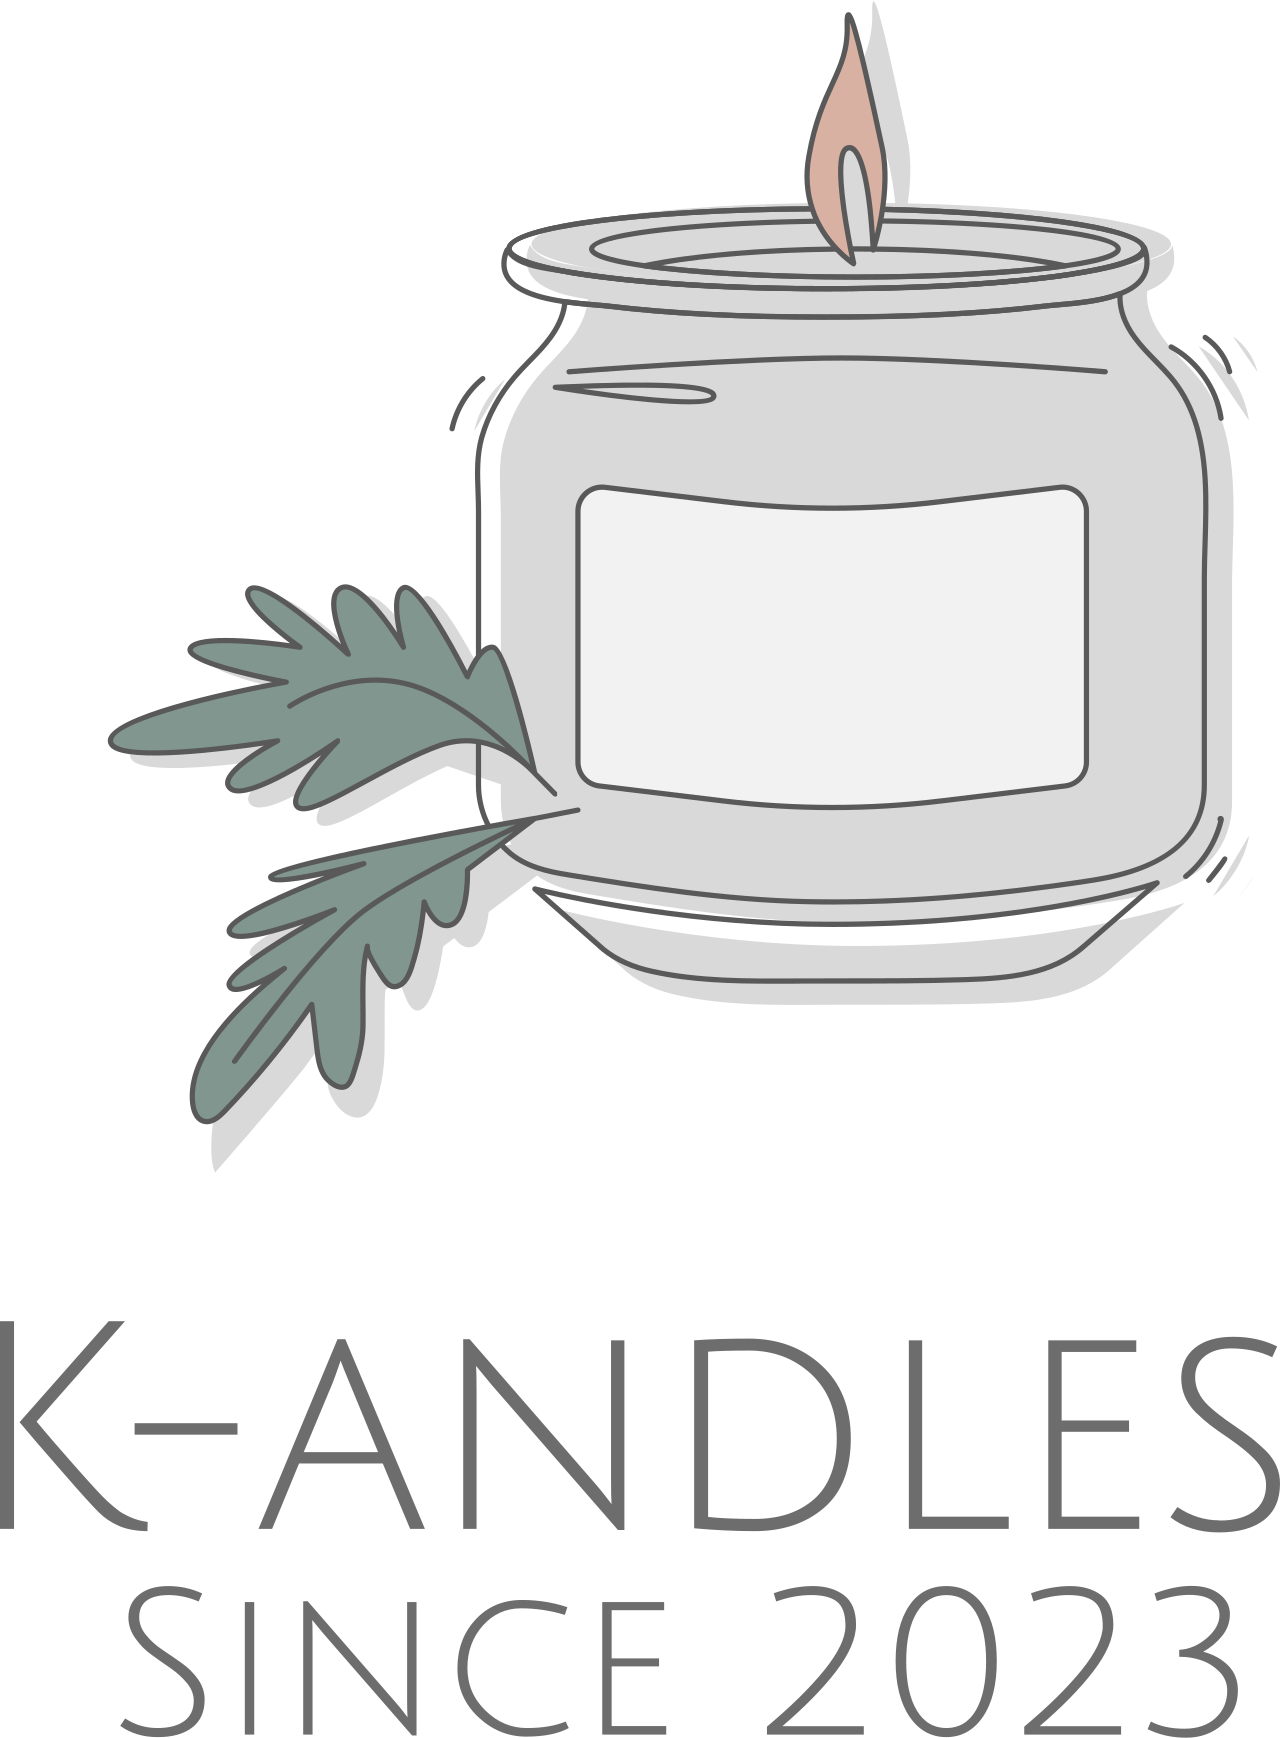 K-andles 's web page